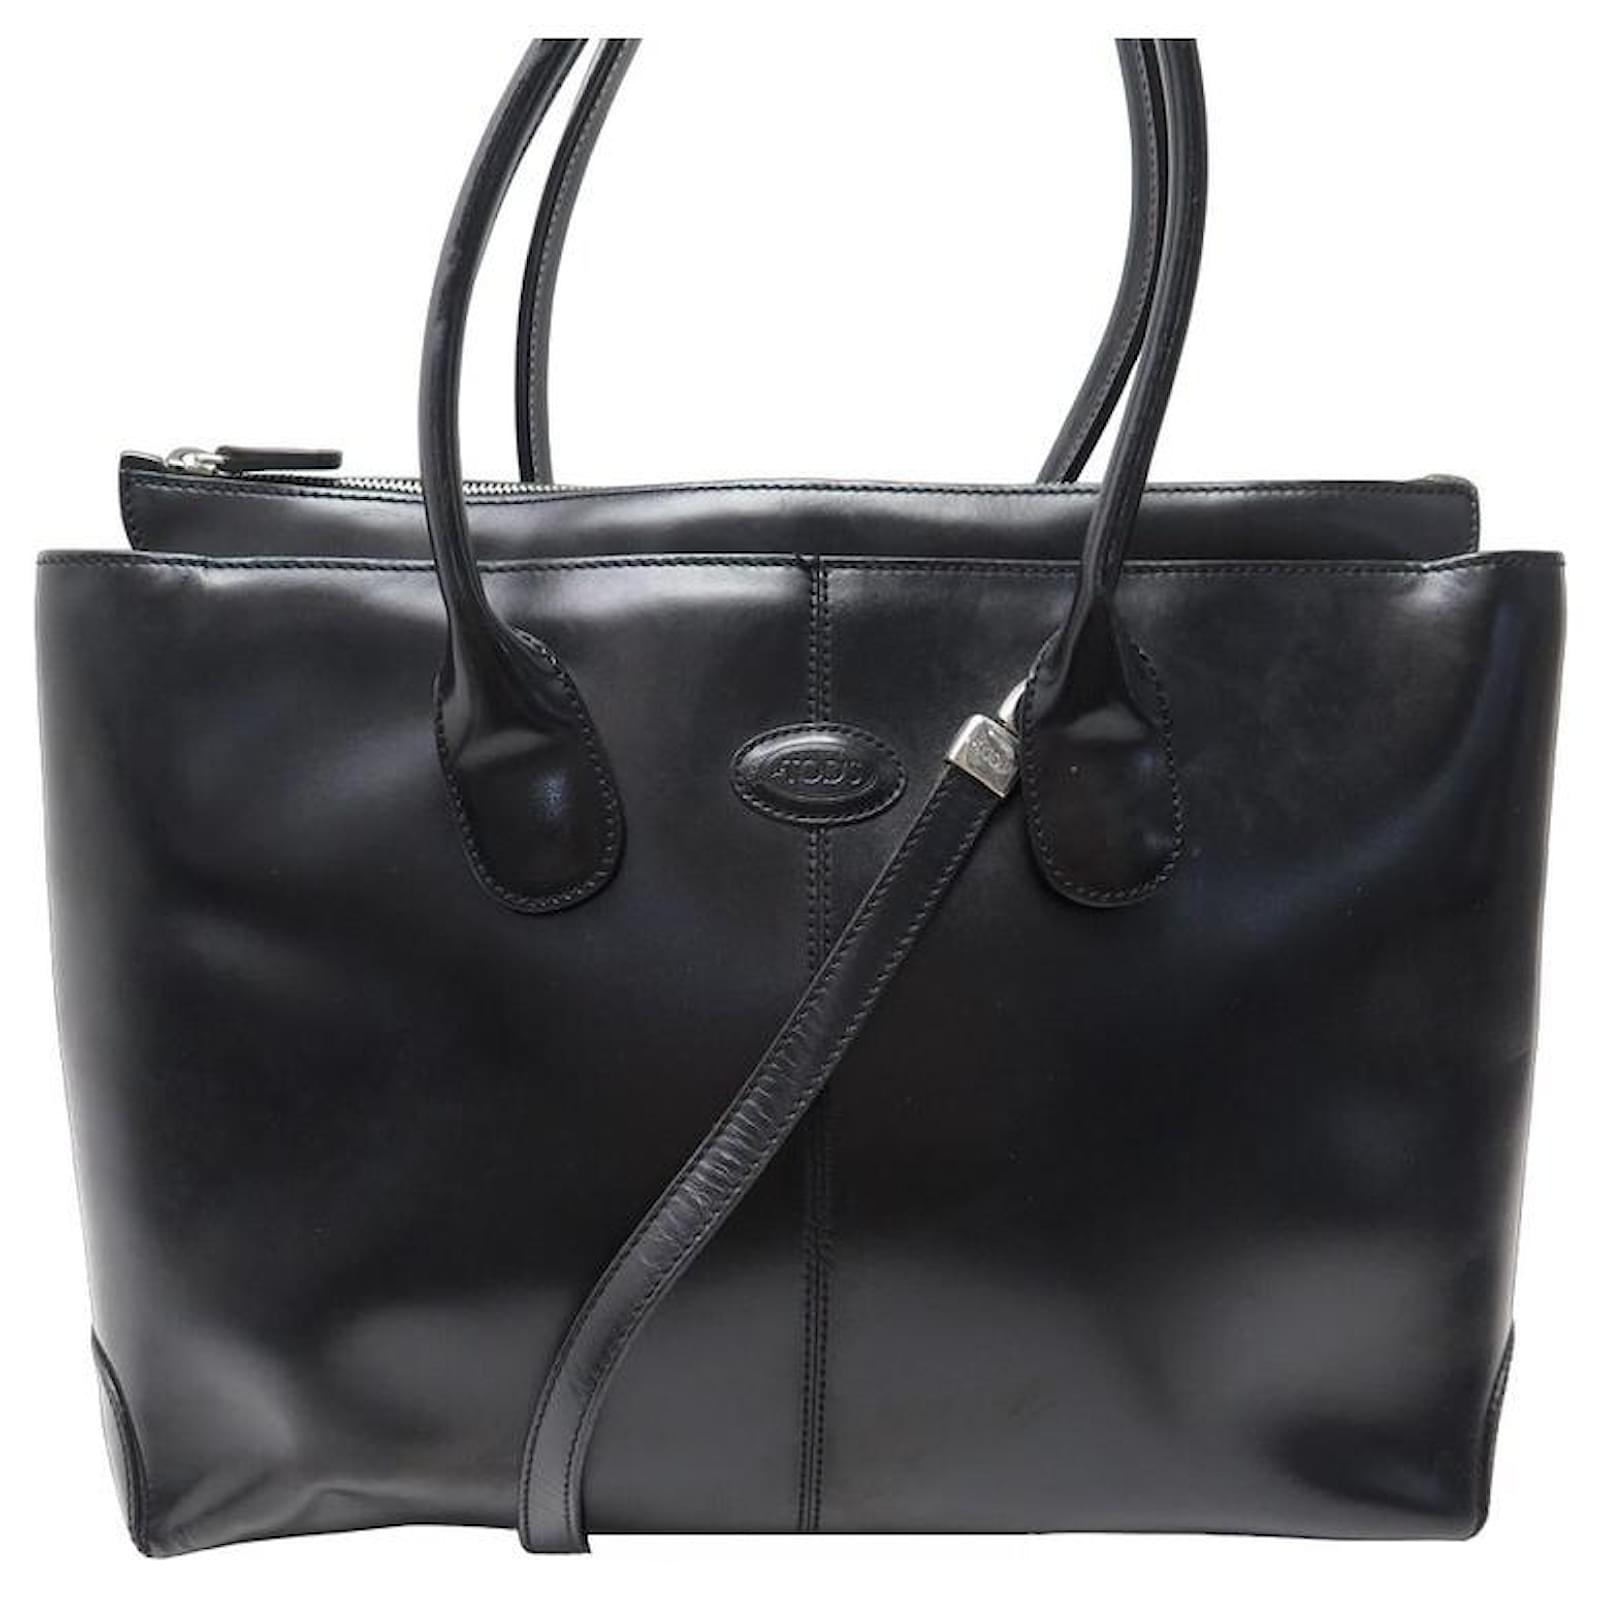 Melissa Bags Carryall Black Leather Tote Bag Purse India | Ubuy